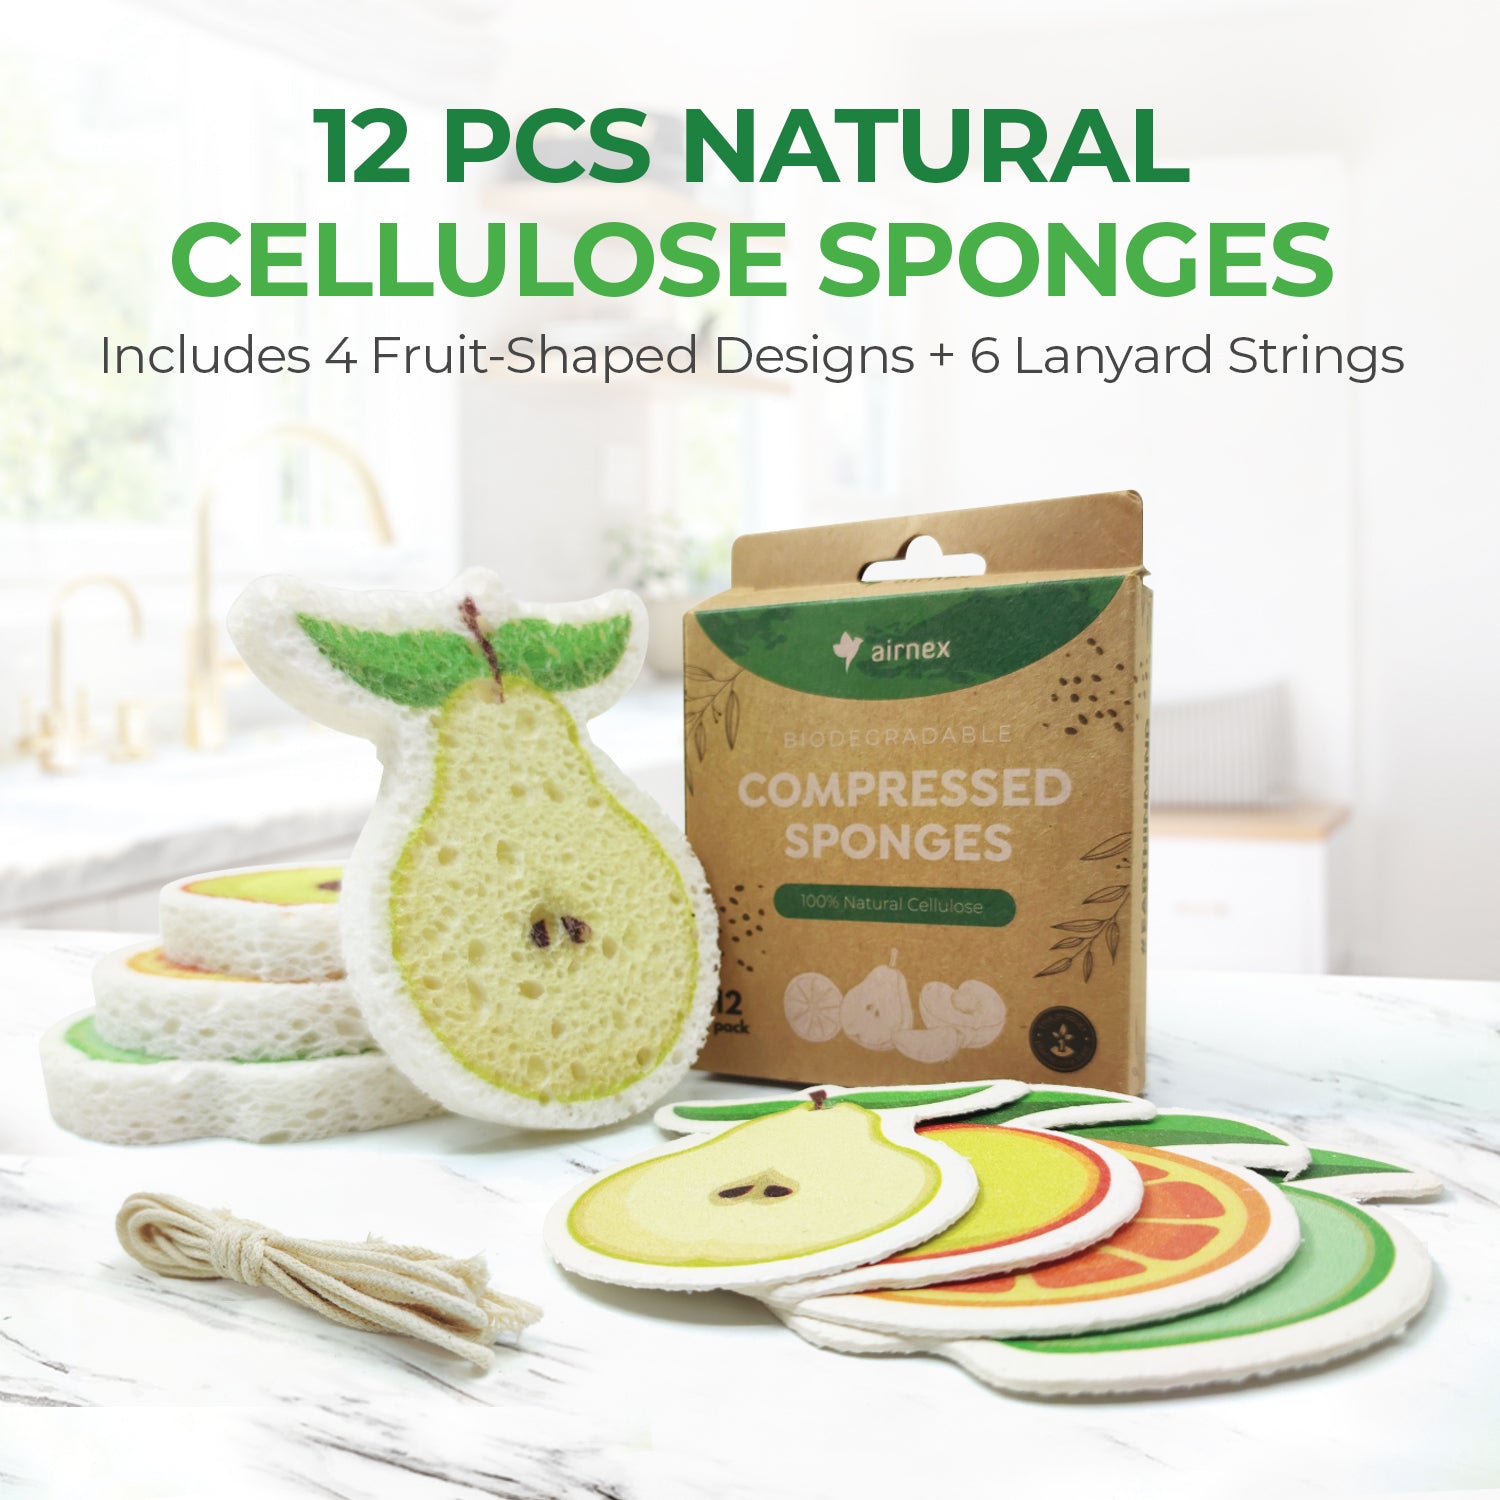 Biodegradable & Compostable Cellulose Compressed Sponges - Pack of 12 Fruit Shaped